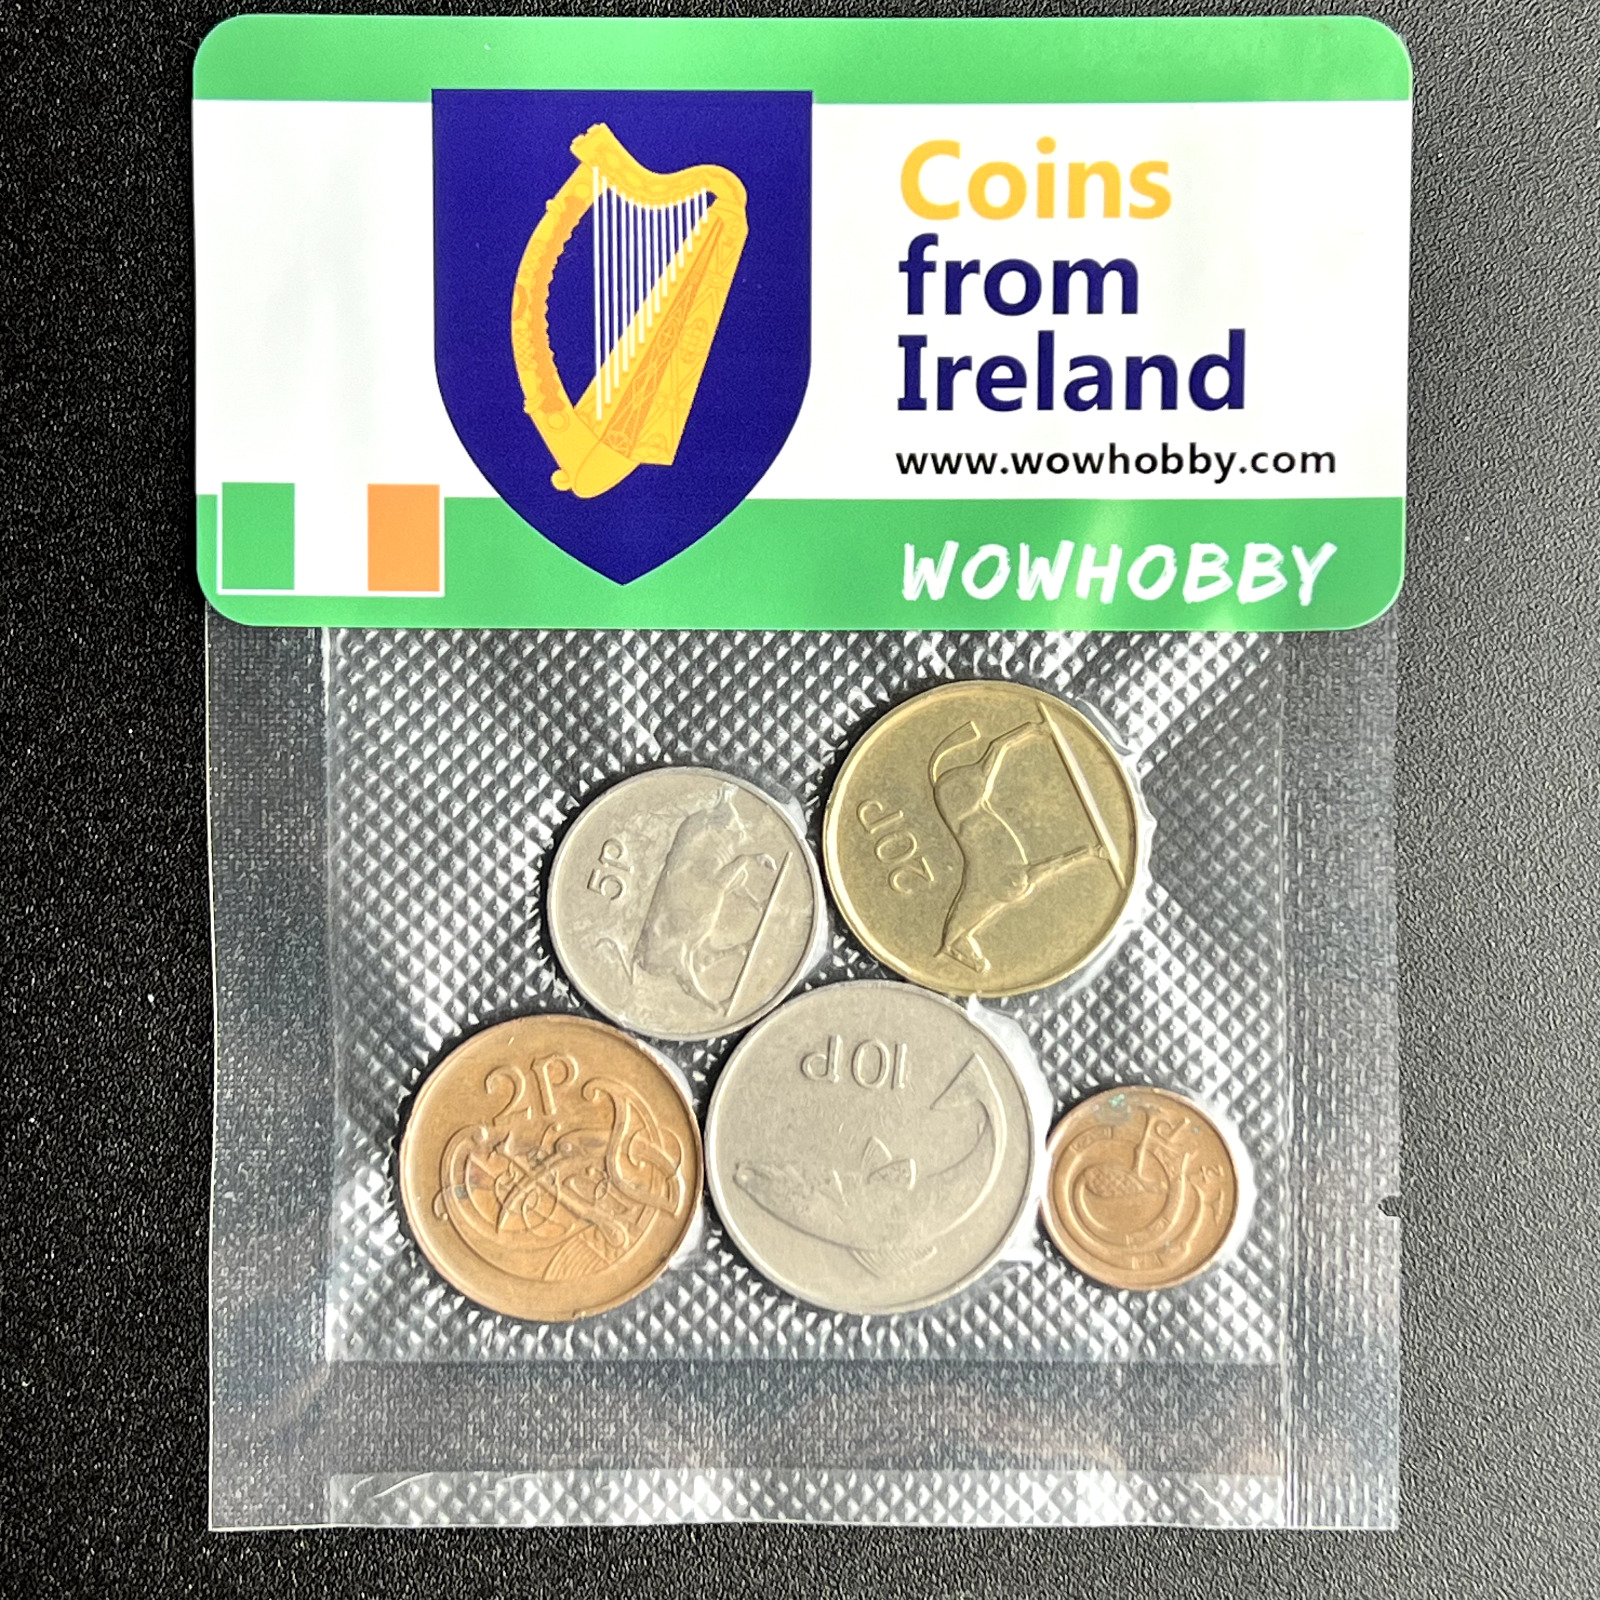 Irish Coins: 5 Unique Random Coins from Ireland for Coin Collecting